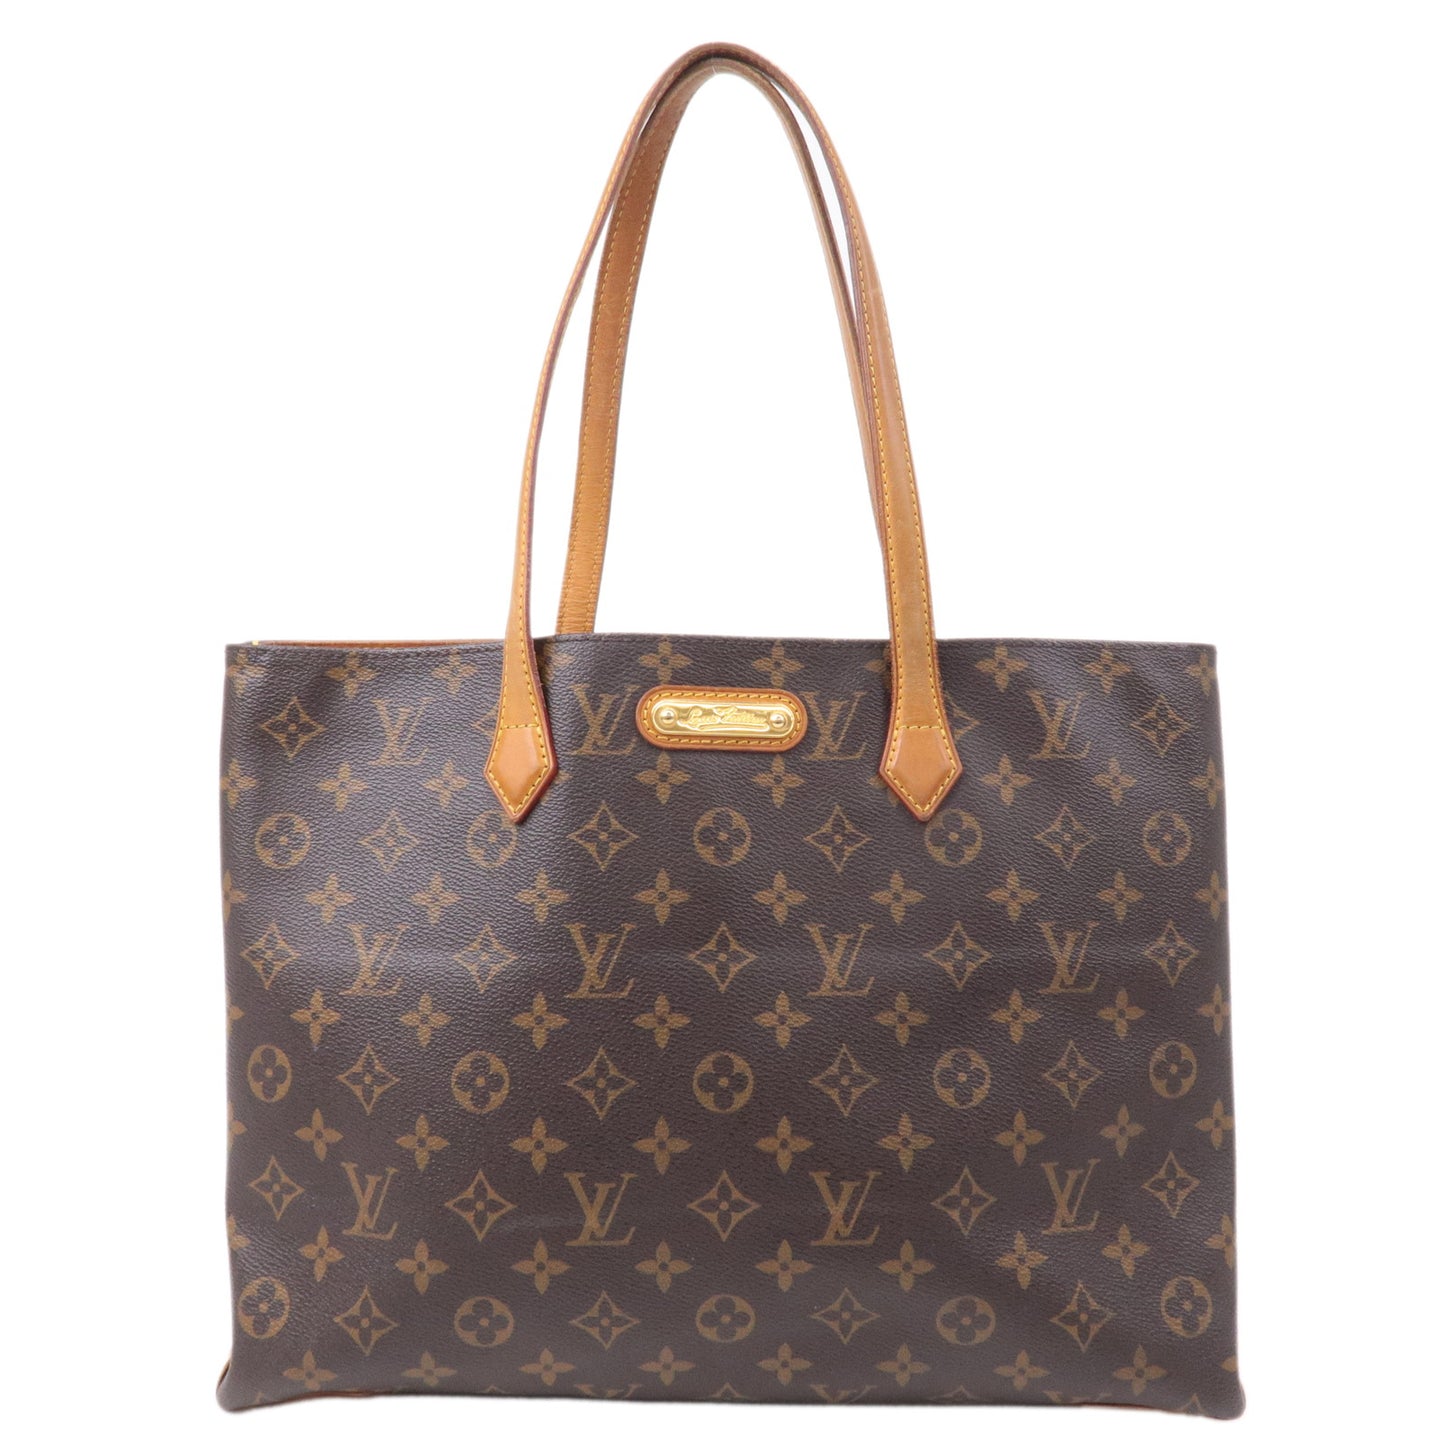 Used Louis Vuitton Wilshire Mm/Tote Bag Stocking/Pvc/Brw//M45644